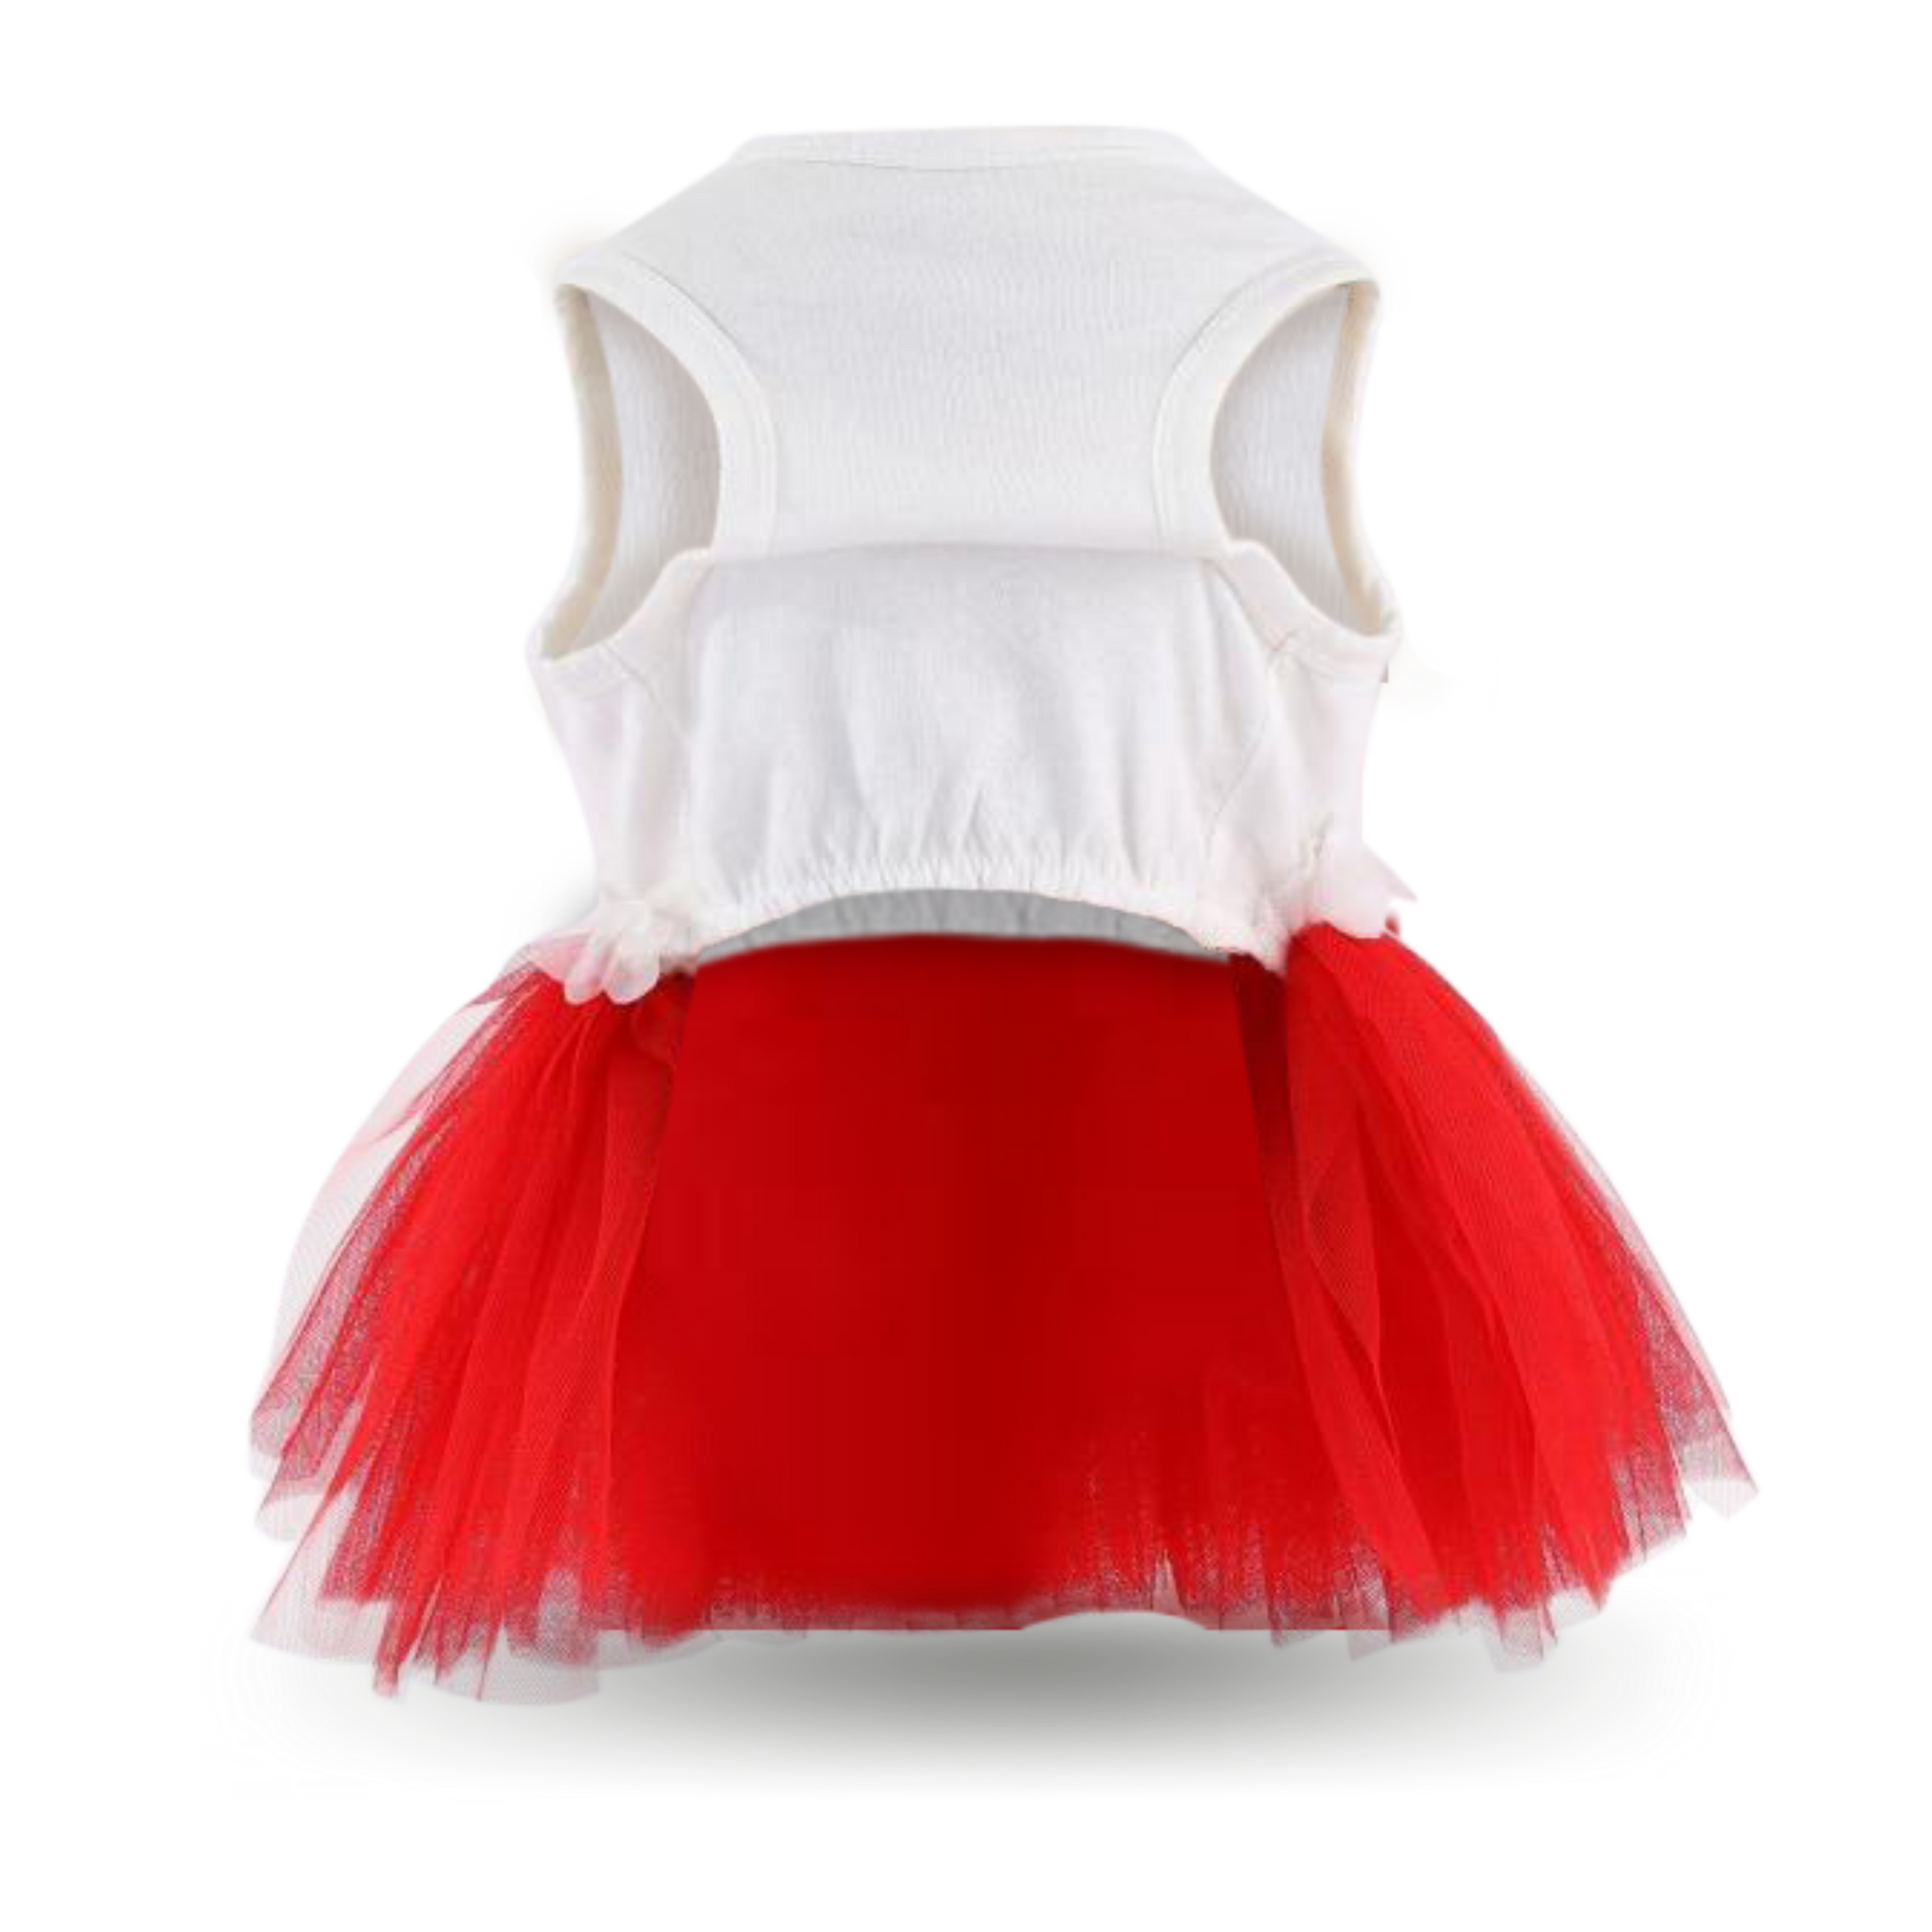 Soft cotton bodice with a fine embroidered mesh overlay, with pretty multi-layered red tulle skirt and red tulle bowtie at the waist